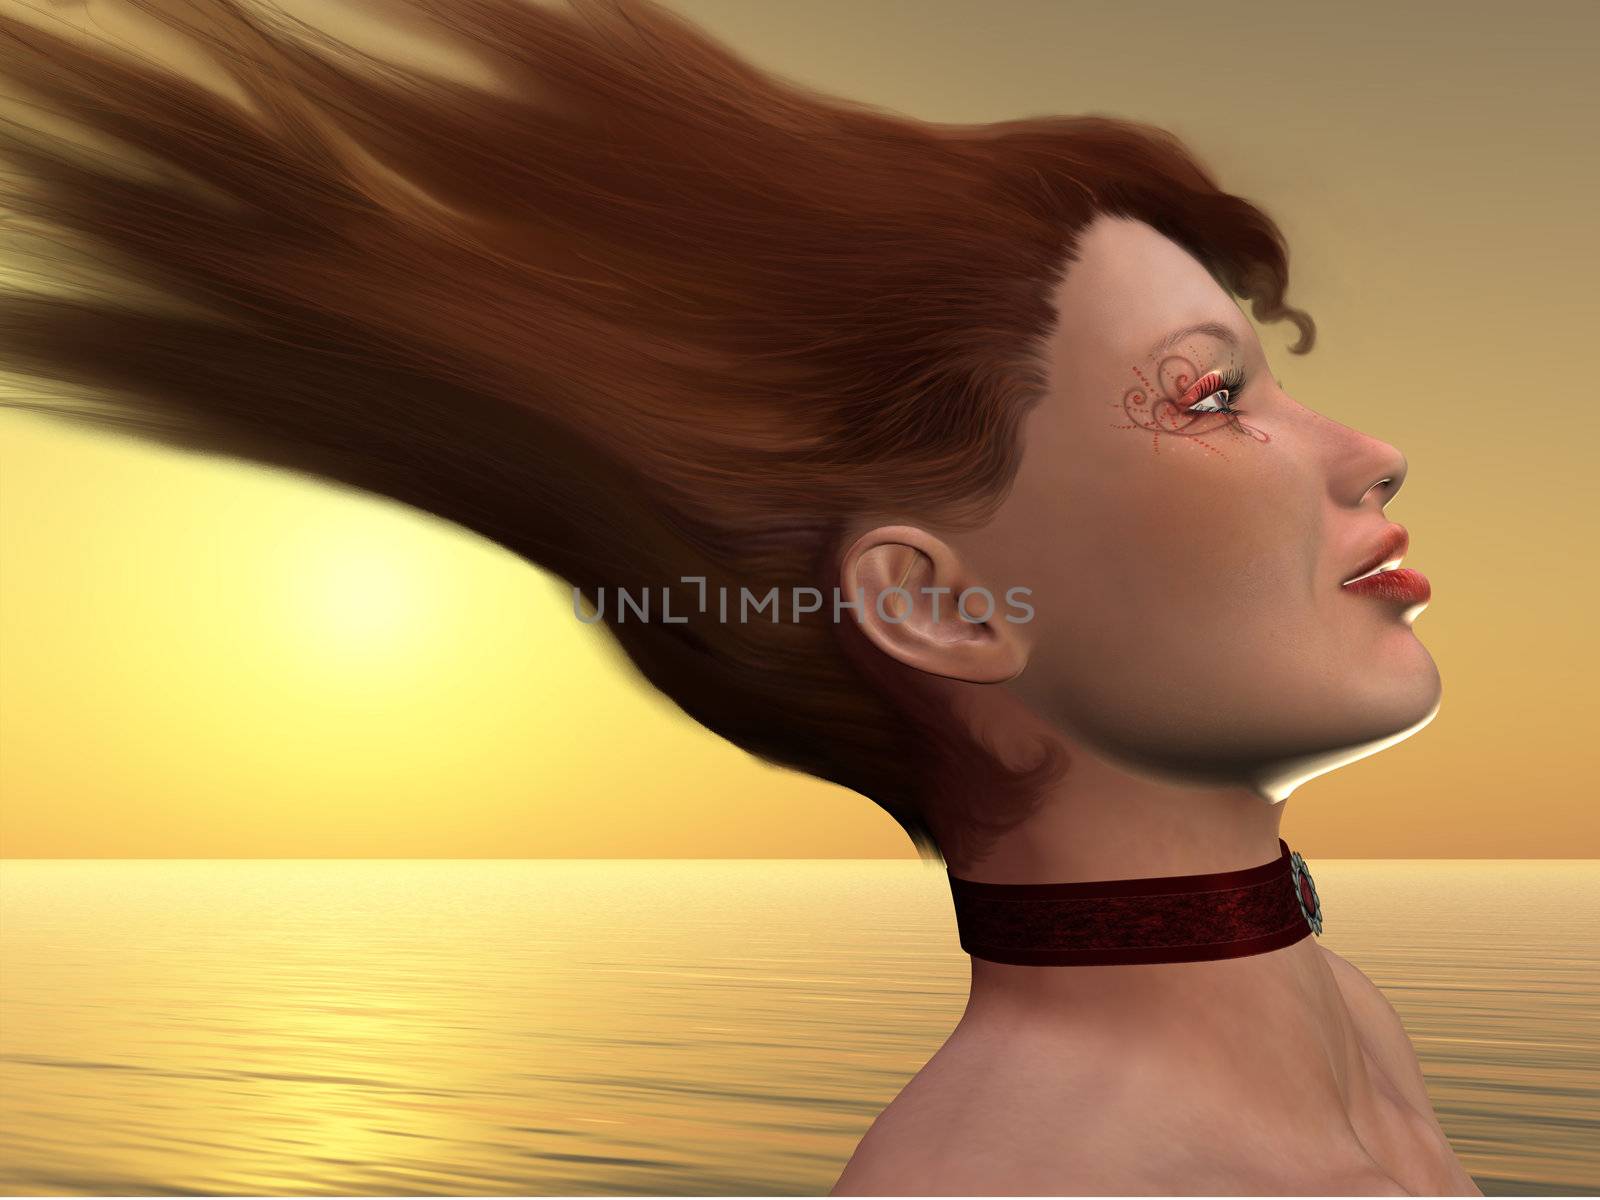 A redheaded beauty's hair flies in a wind gust by the ocean.